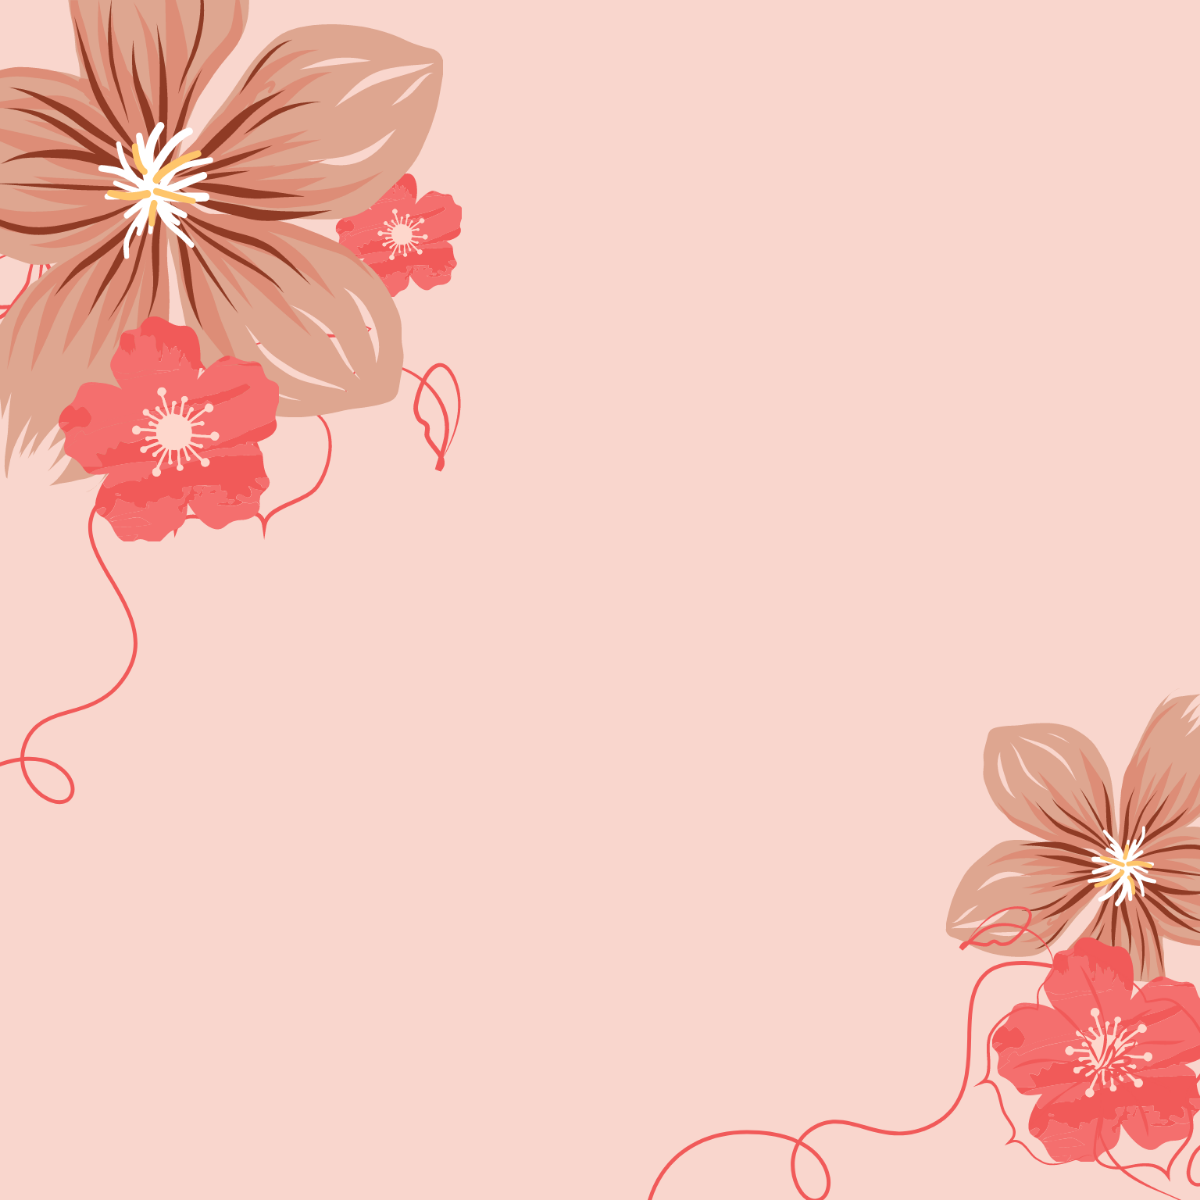 Watercolor Floral Background Clipart Template